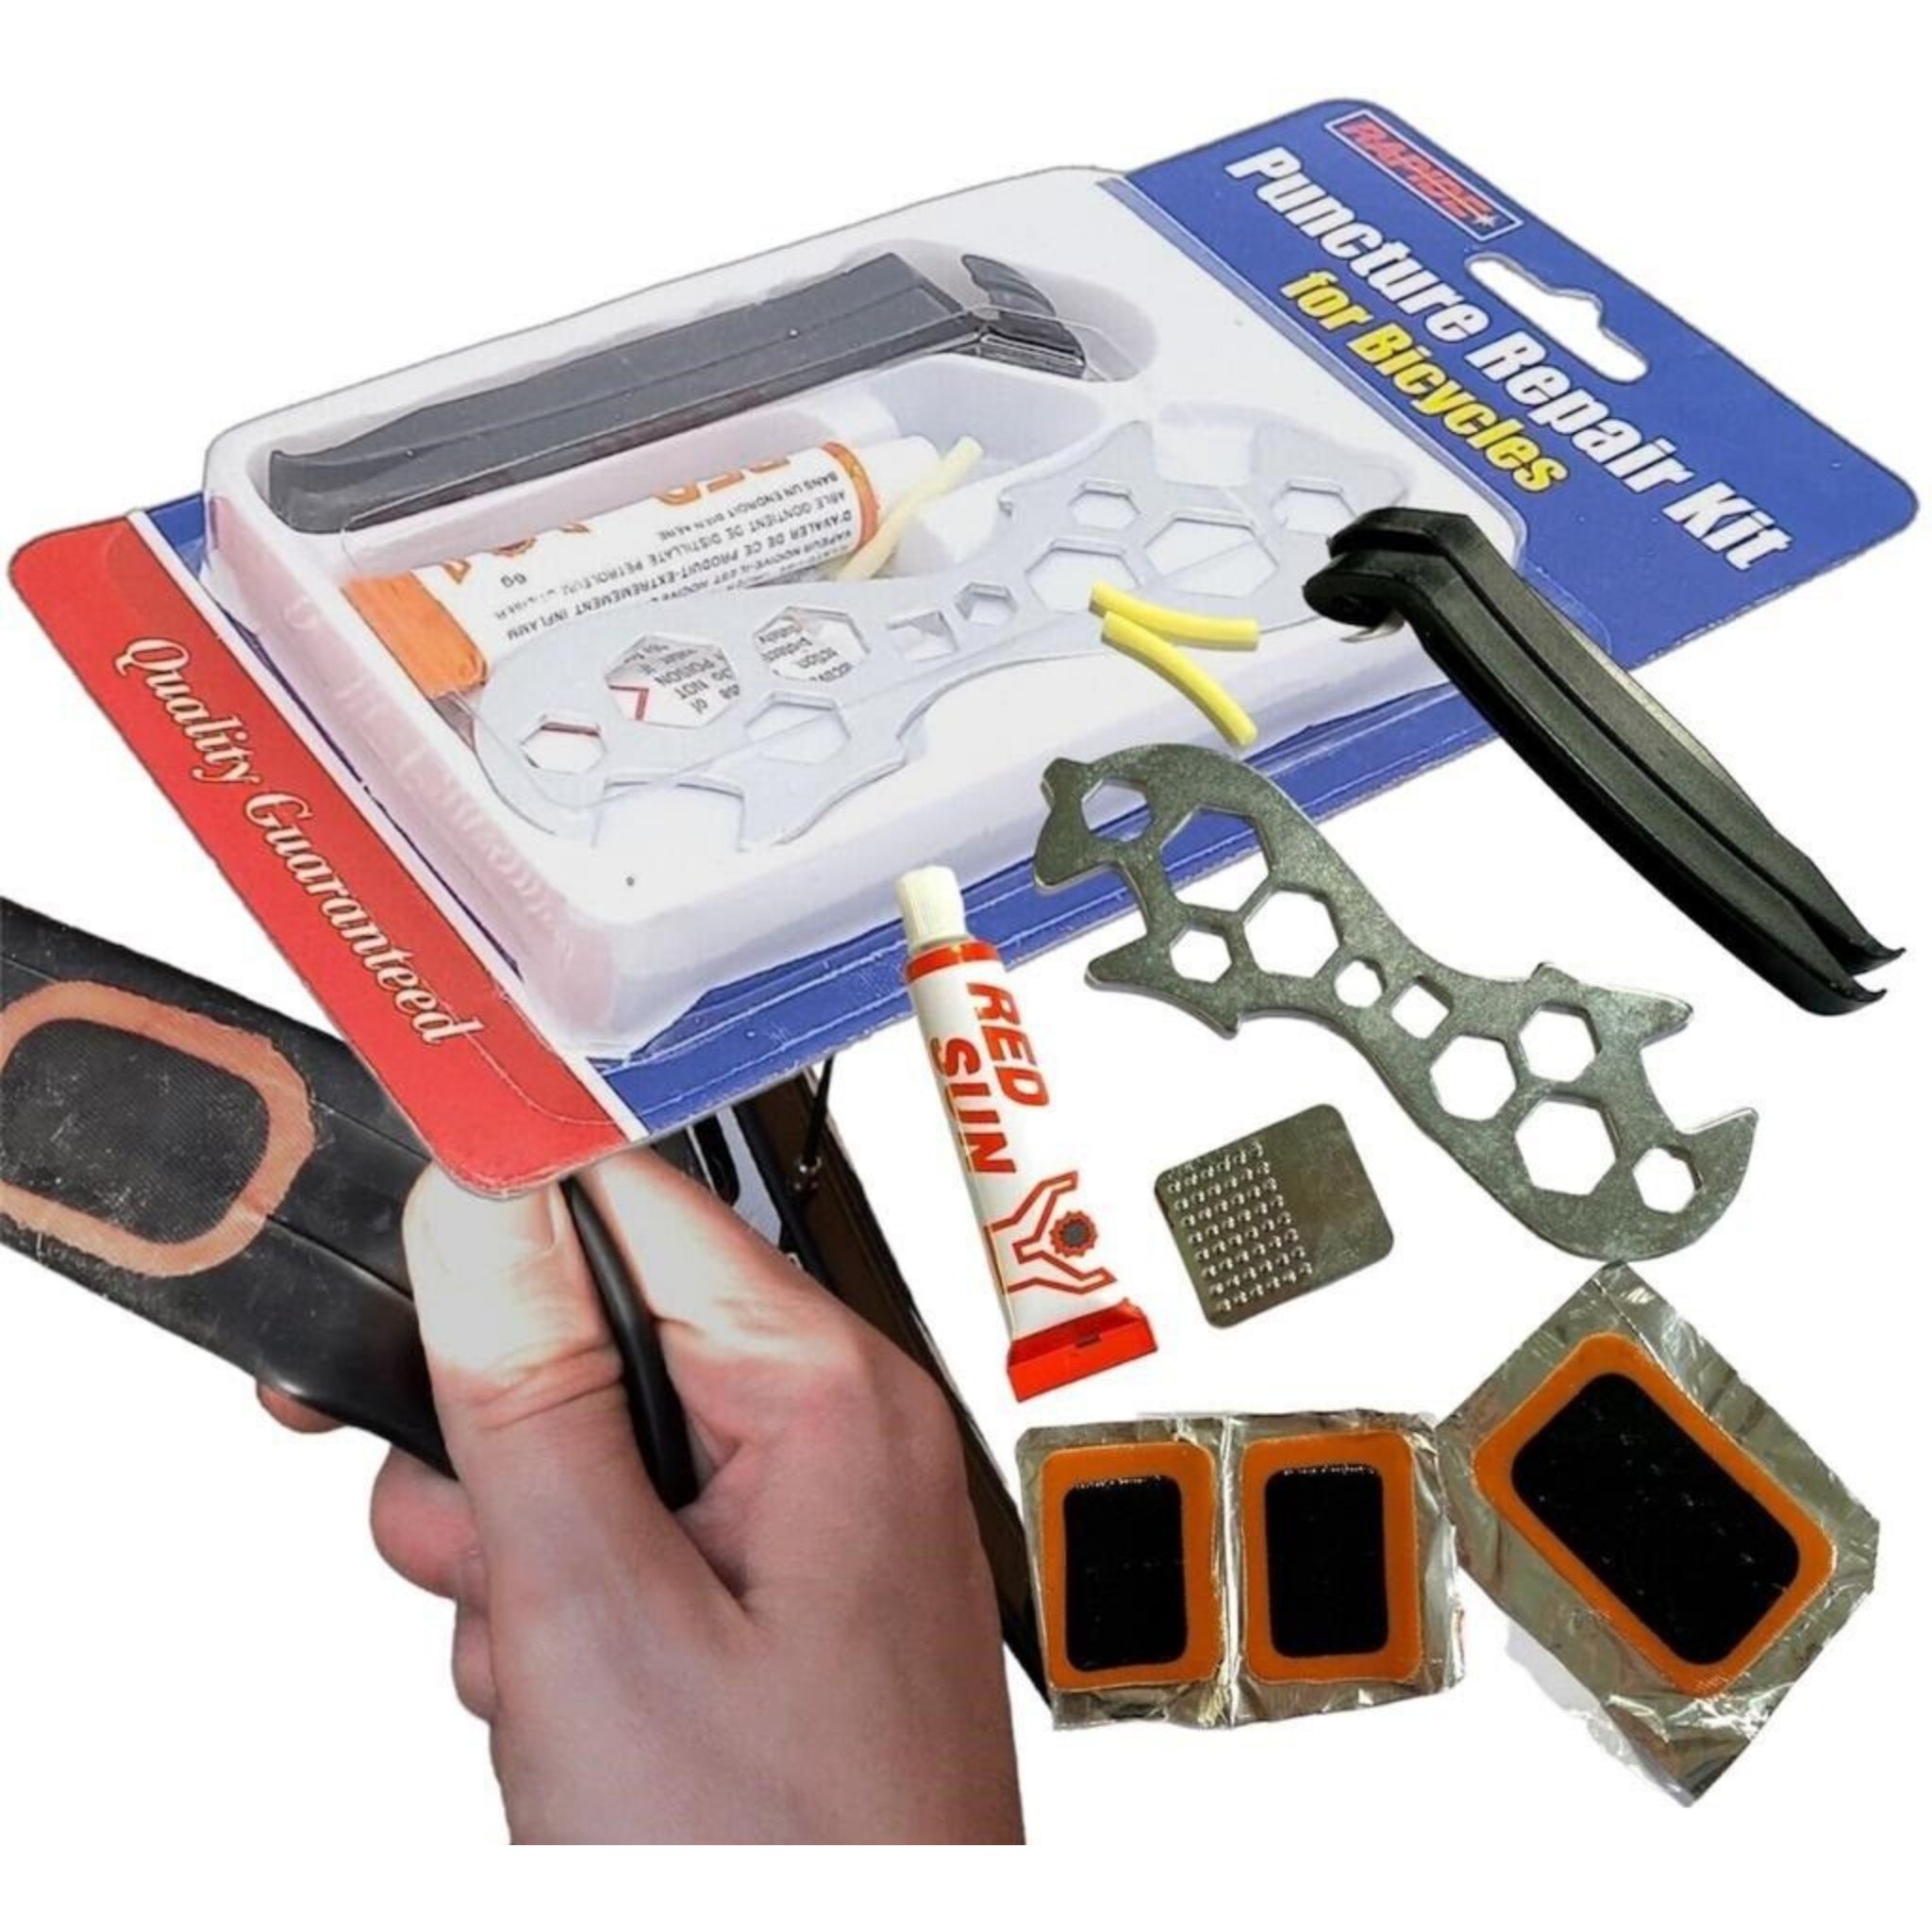 Beclen Harp 10pc Bicycle/Bike/Cycle Puncture Repair Portable Tool Kit Including Inner Tube Patch And Glue